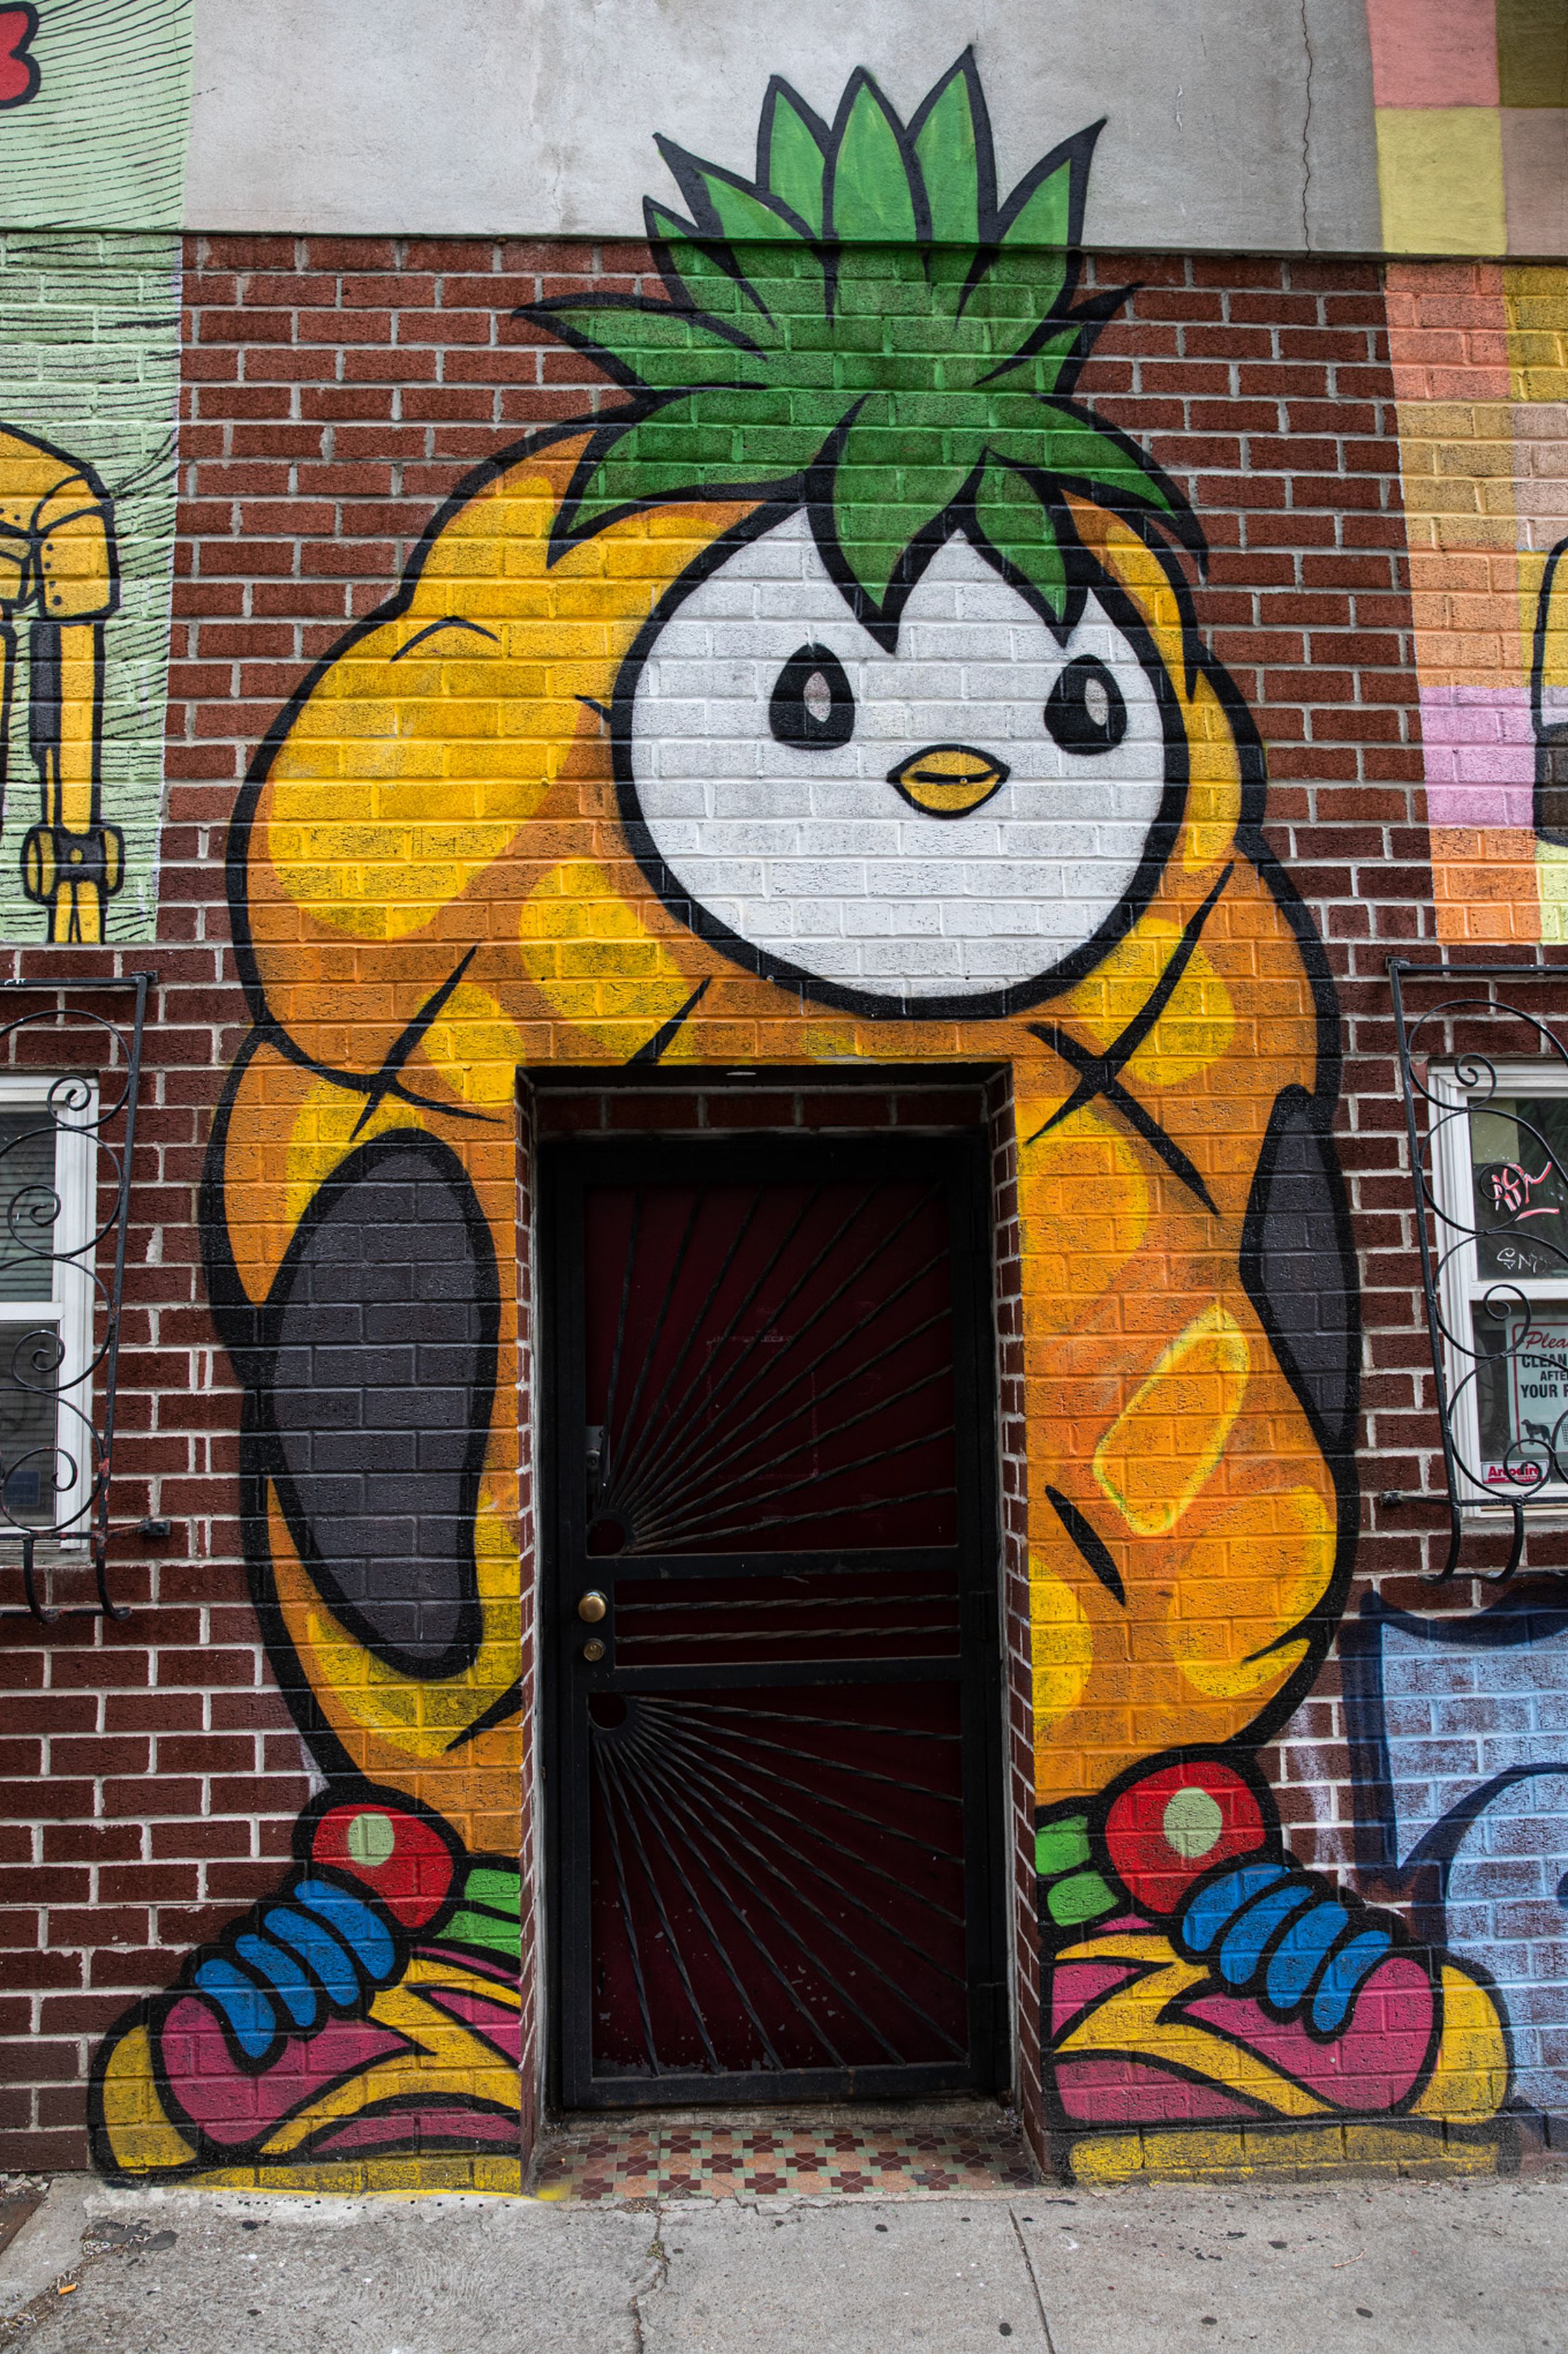 Masnah’s mural of Pudgy Penguin #3950, with added sneakers.